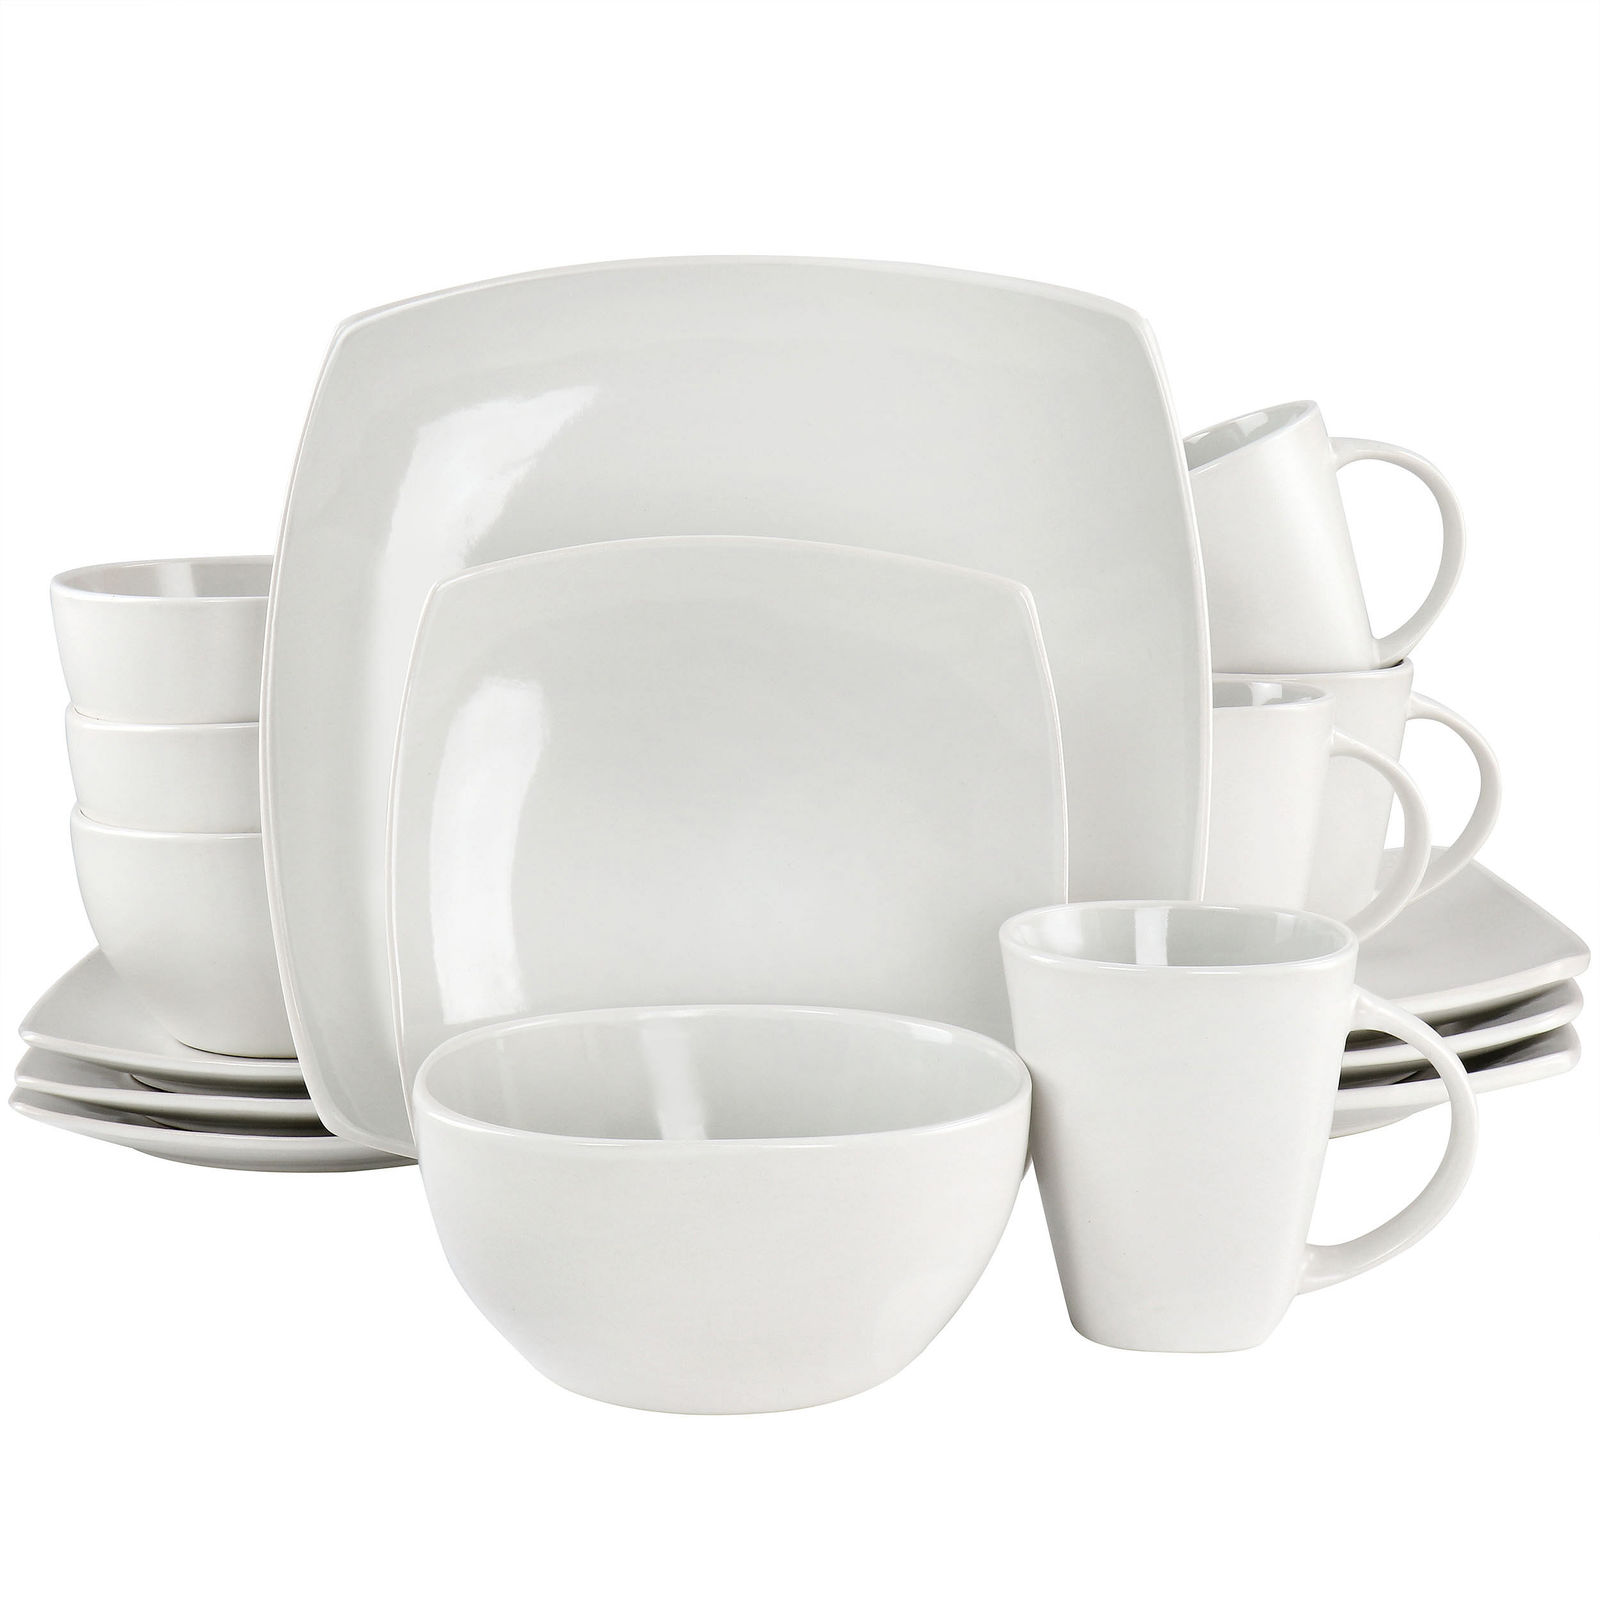 Primary image for Soho Lounge Bright Shell 16 Piece Square Stoneware Dinnerware Set in Shell Whit